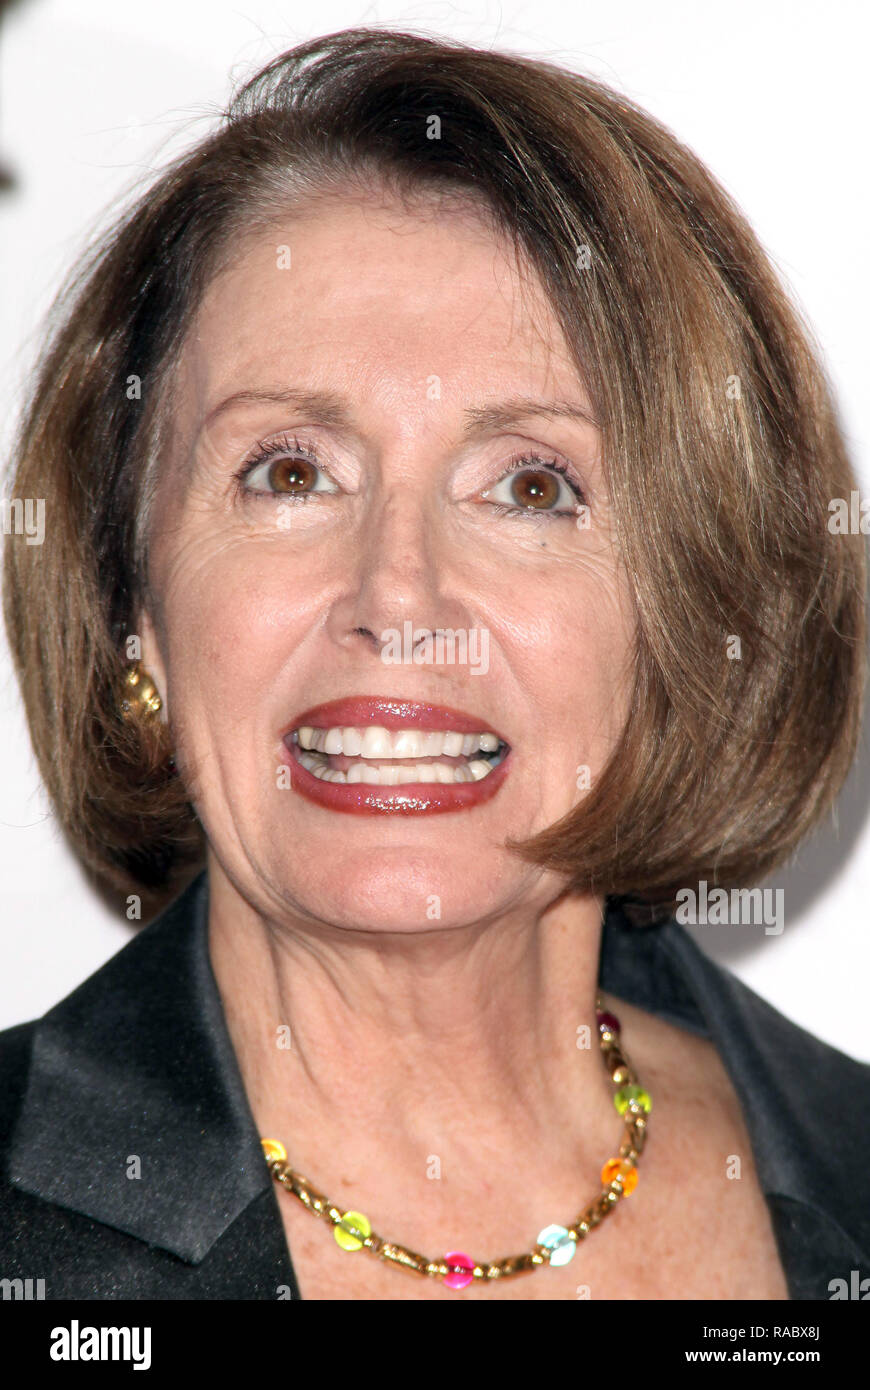 ***FILE PHOTO*** NANCY PELOSI ELECTED AS SPEAKER OF THE HOUSE Nancy Pelosi & Paul Pelosi arriving for he Opening Night Performance of the Broadway Musical "RAGTIME" at The Neil Simon Theatre in New York City. November 15, 2009 Credit: Walter McBride/MediaPunch Stock Photo